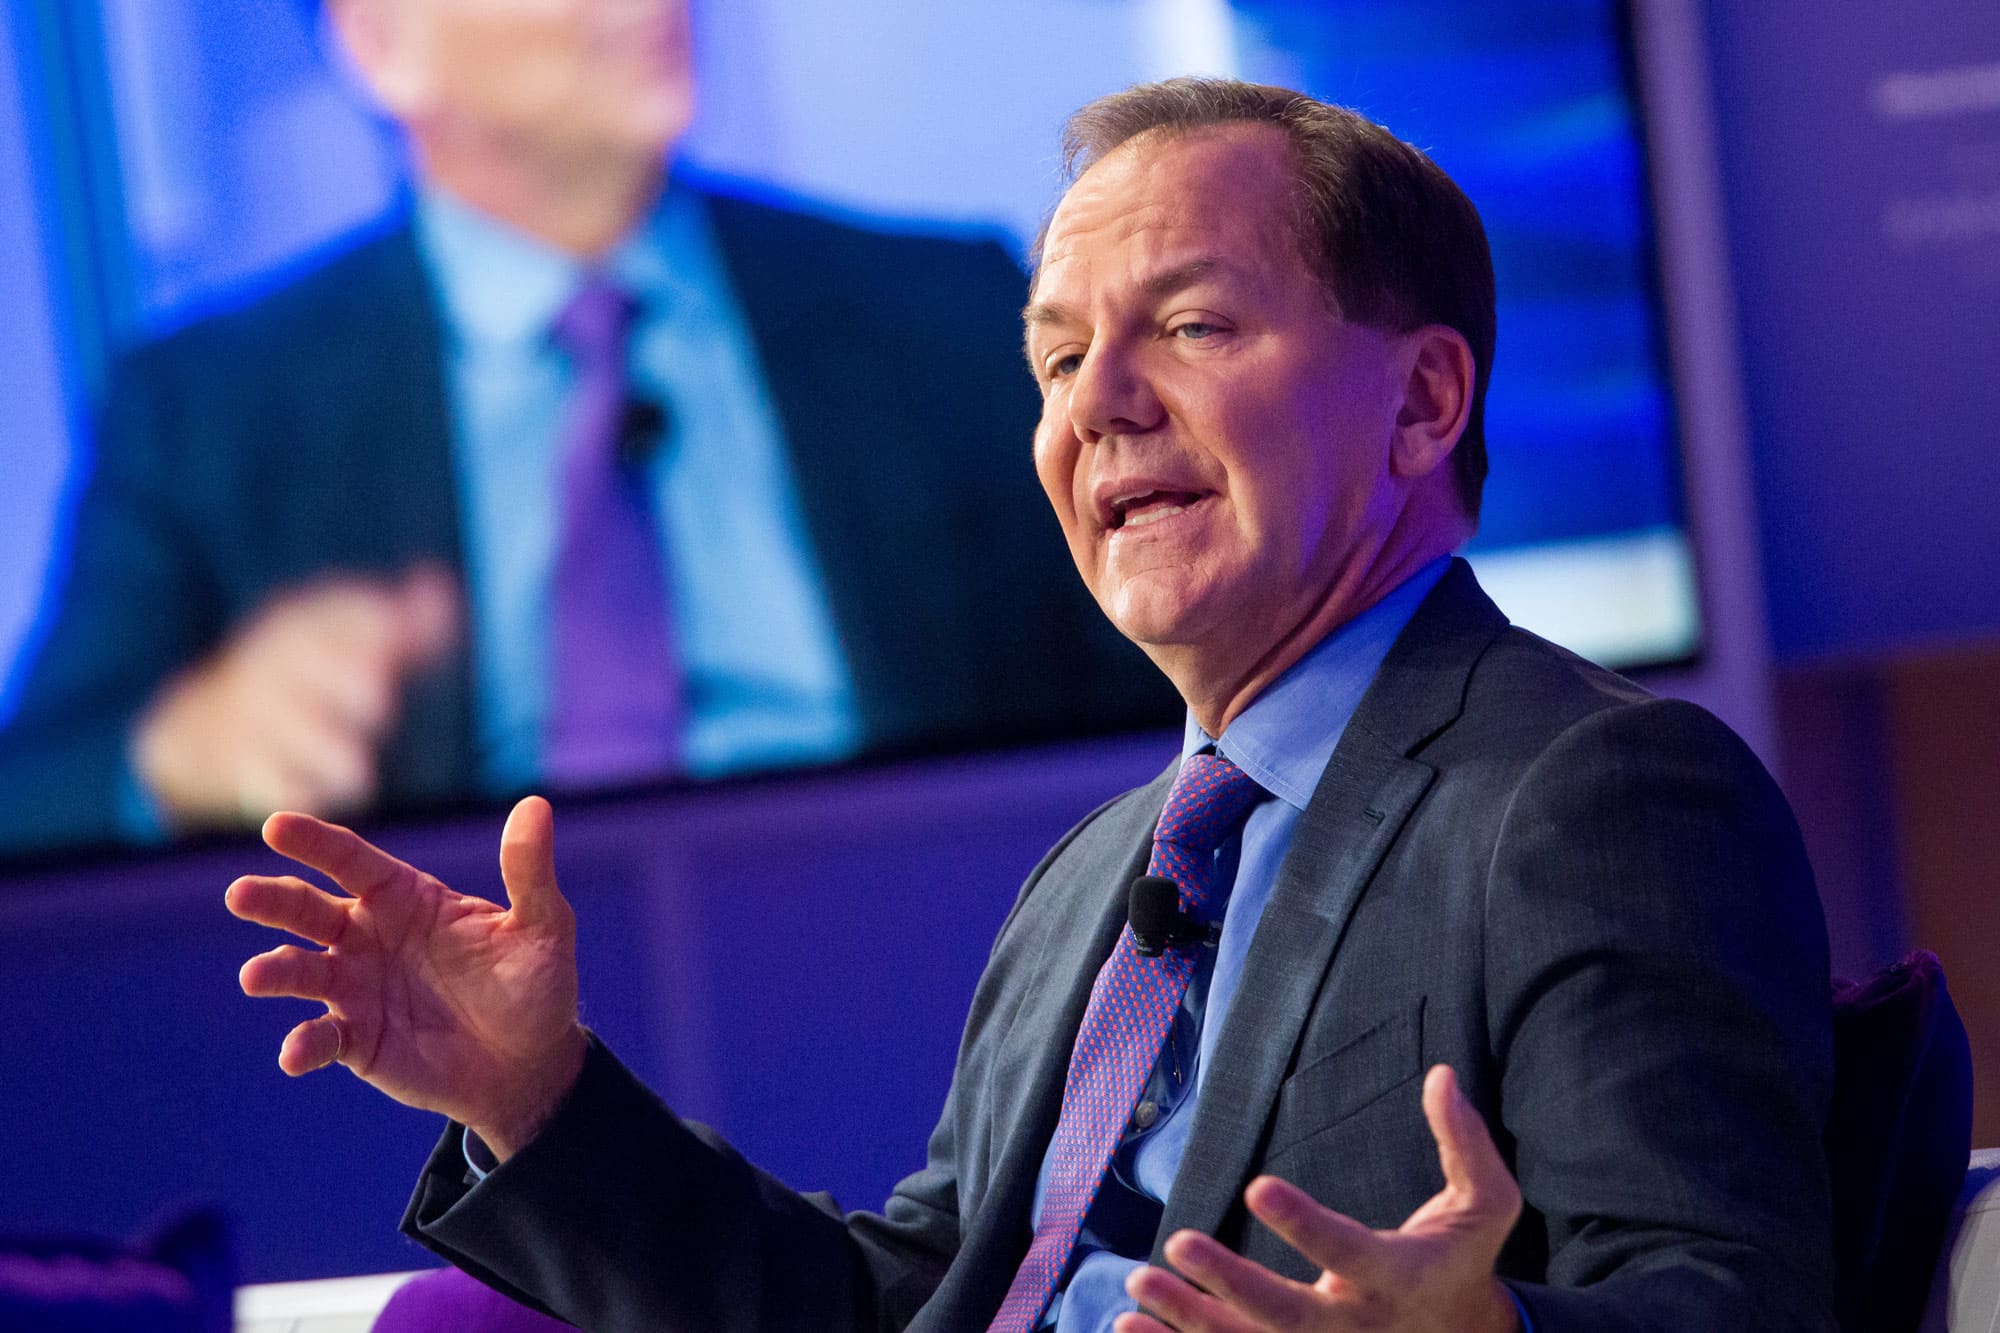 Paul Tudor Jones says inflation could be worse than feared, biggest threat to markets and society